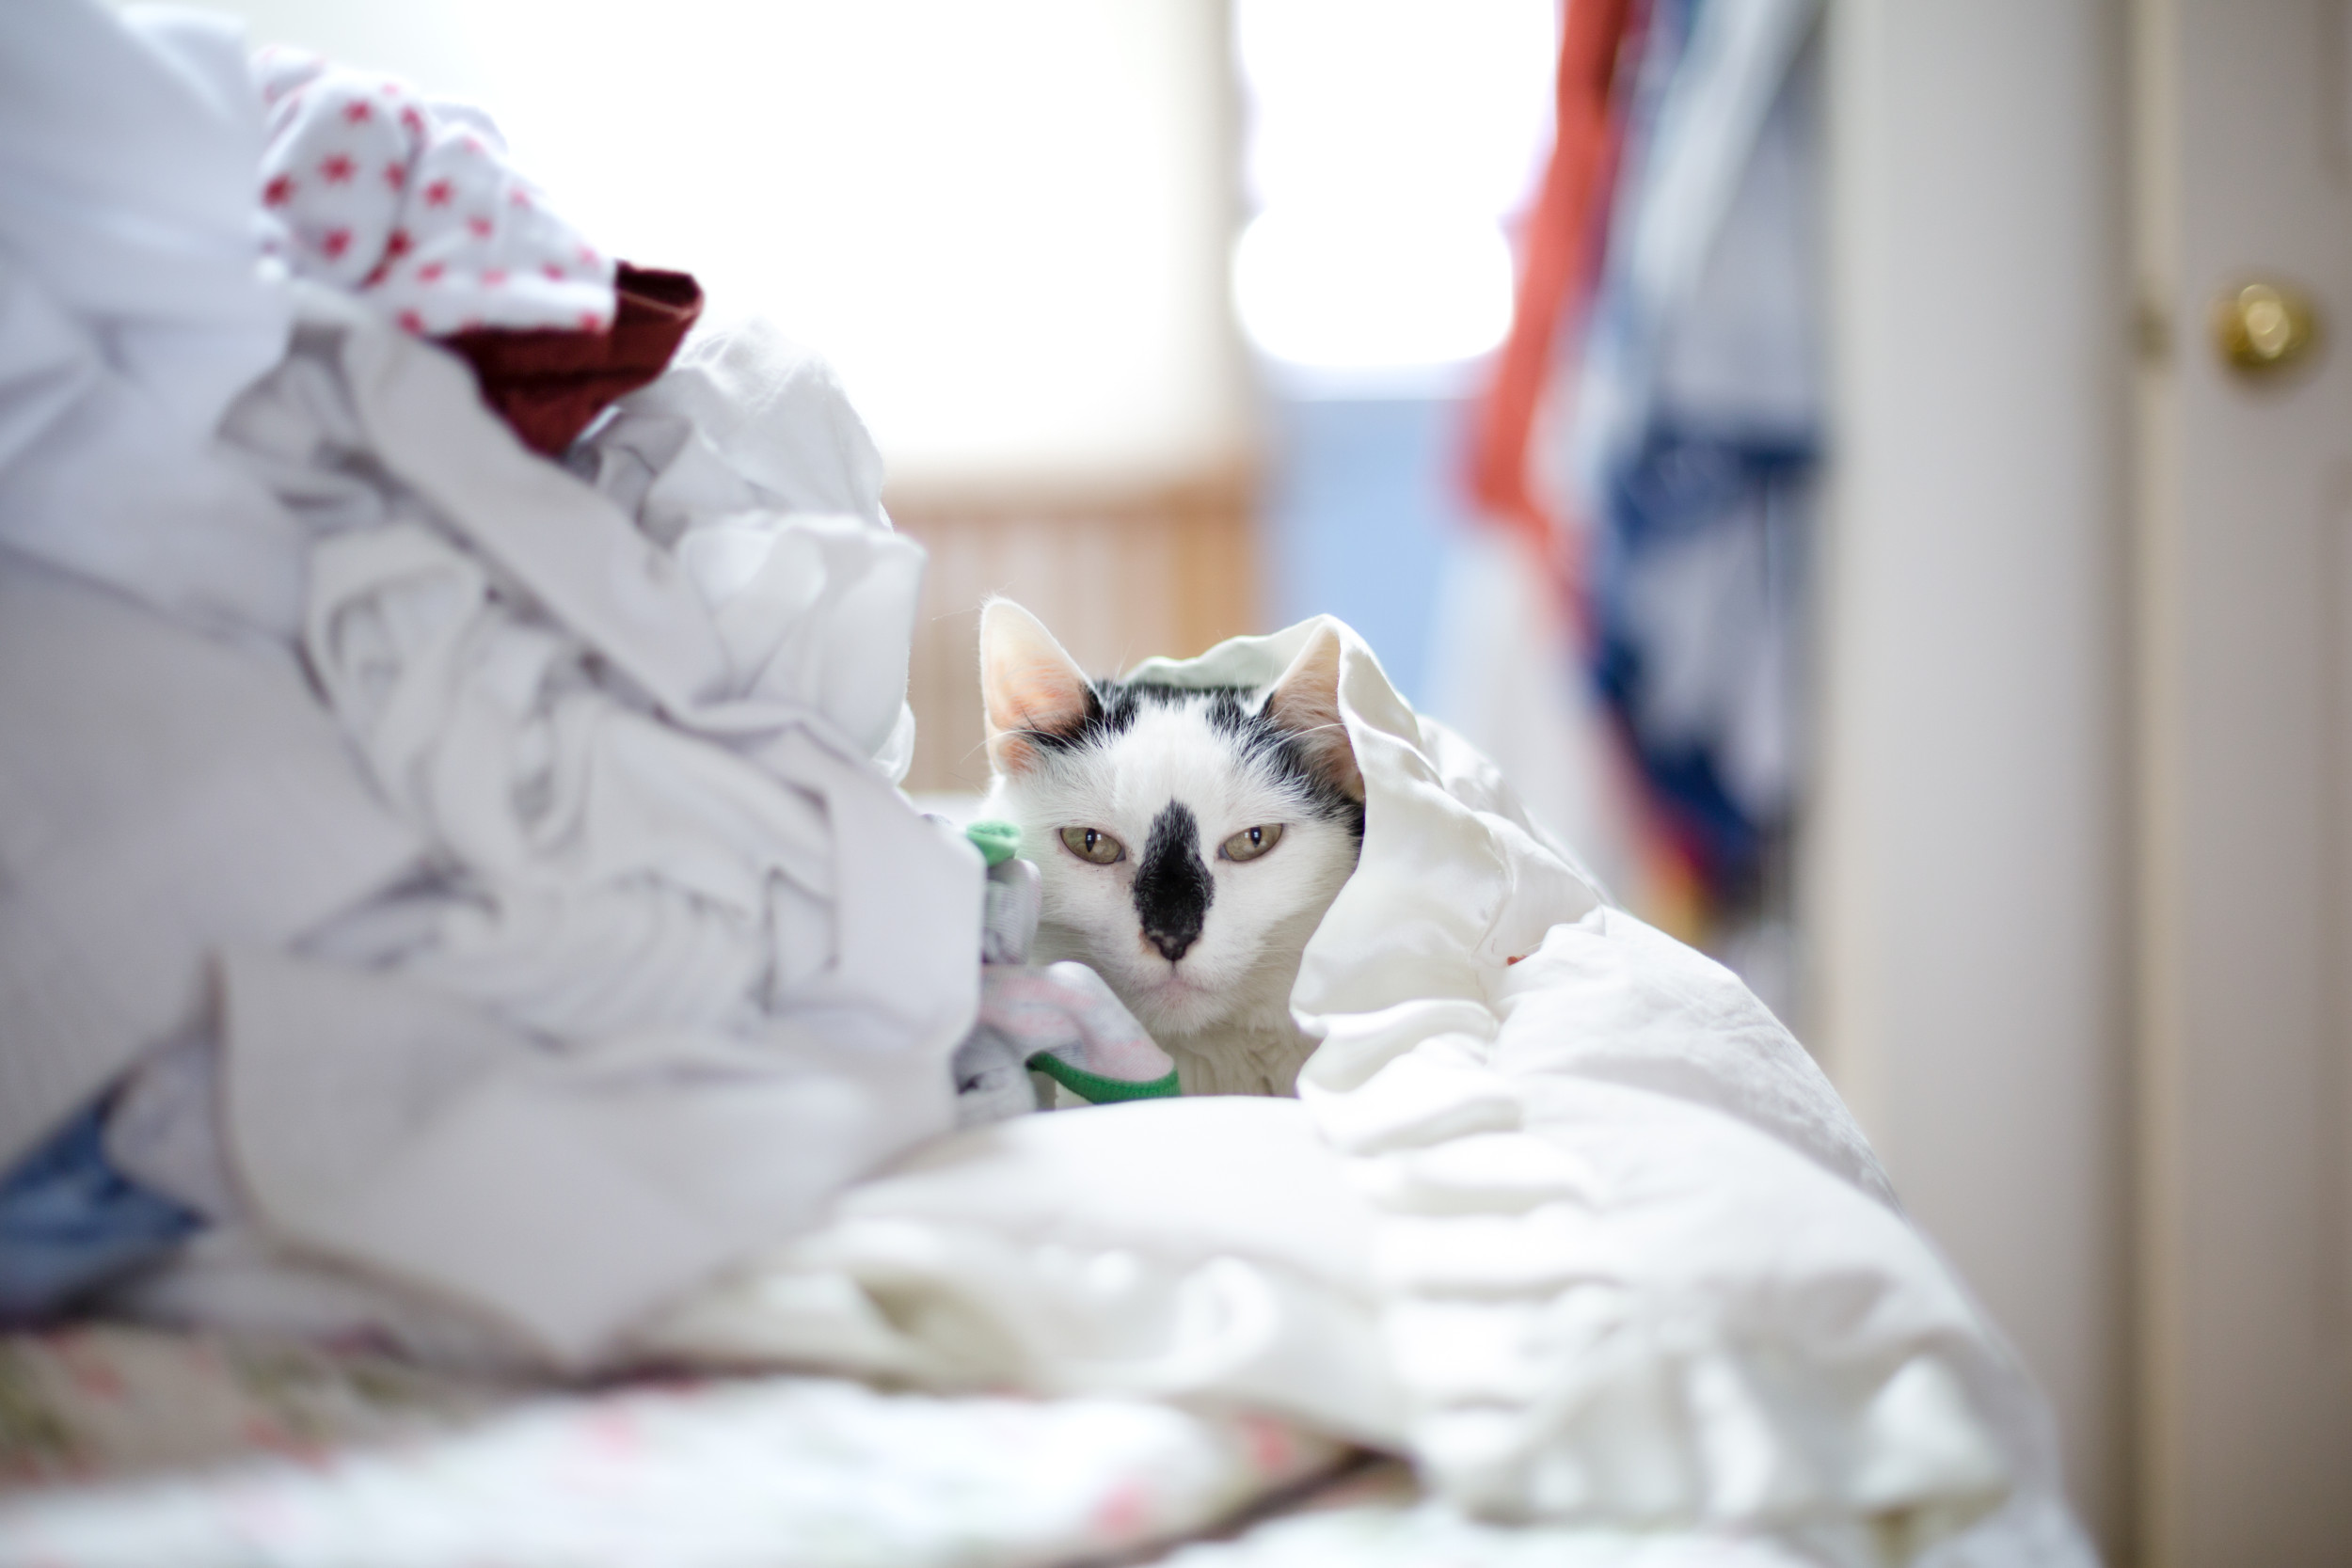 Cat Owner’s ‘Fresh Laundry’ Test Leaves the Internet in Stitches